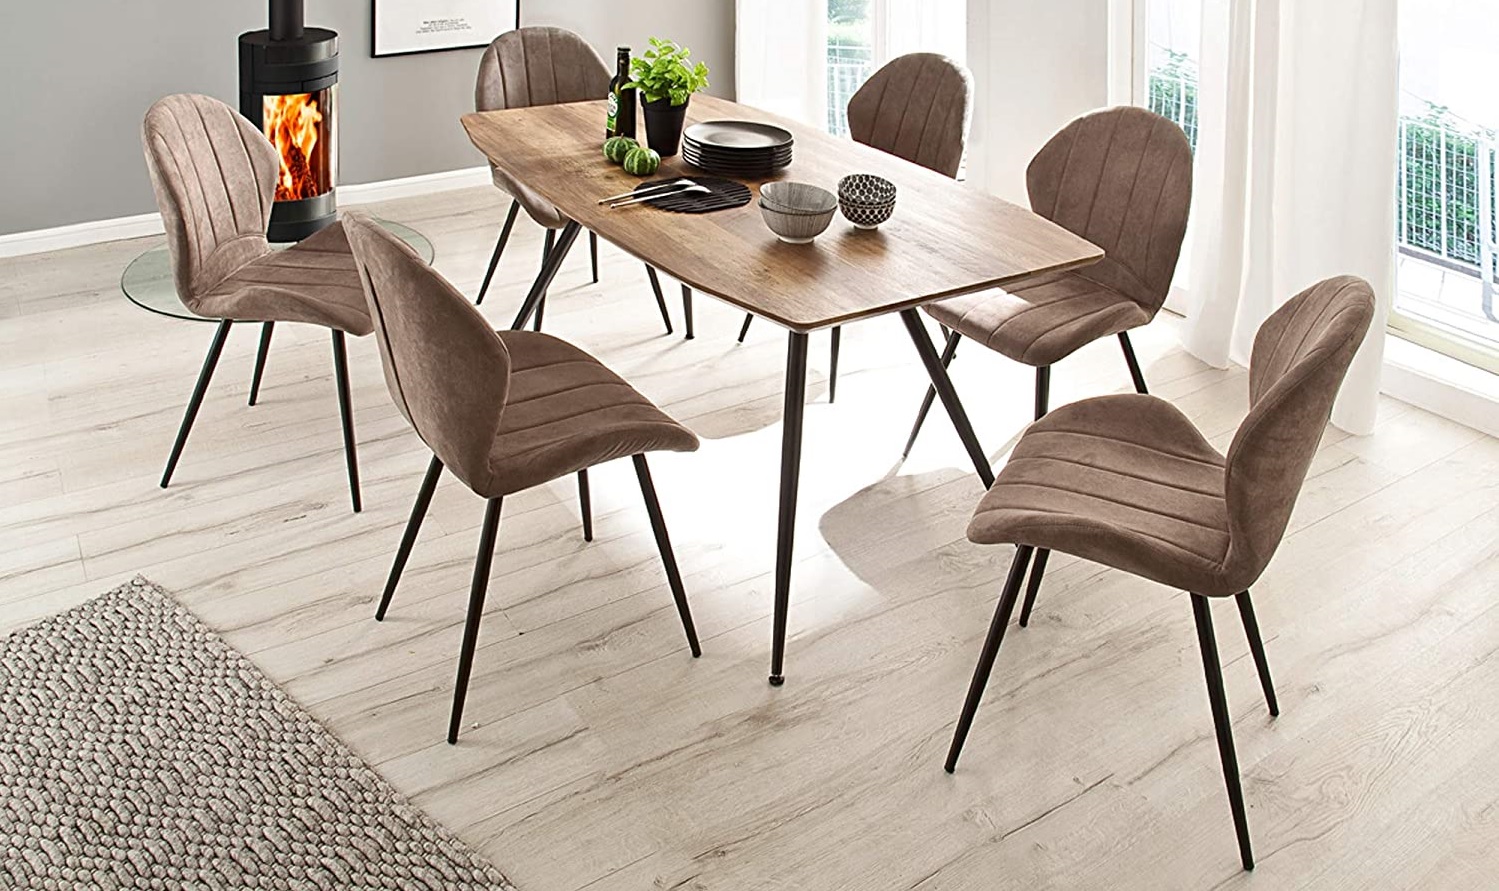 Top 10 Brands to Buy Dining Table and Chairs Online & Instore